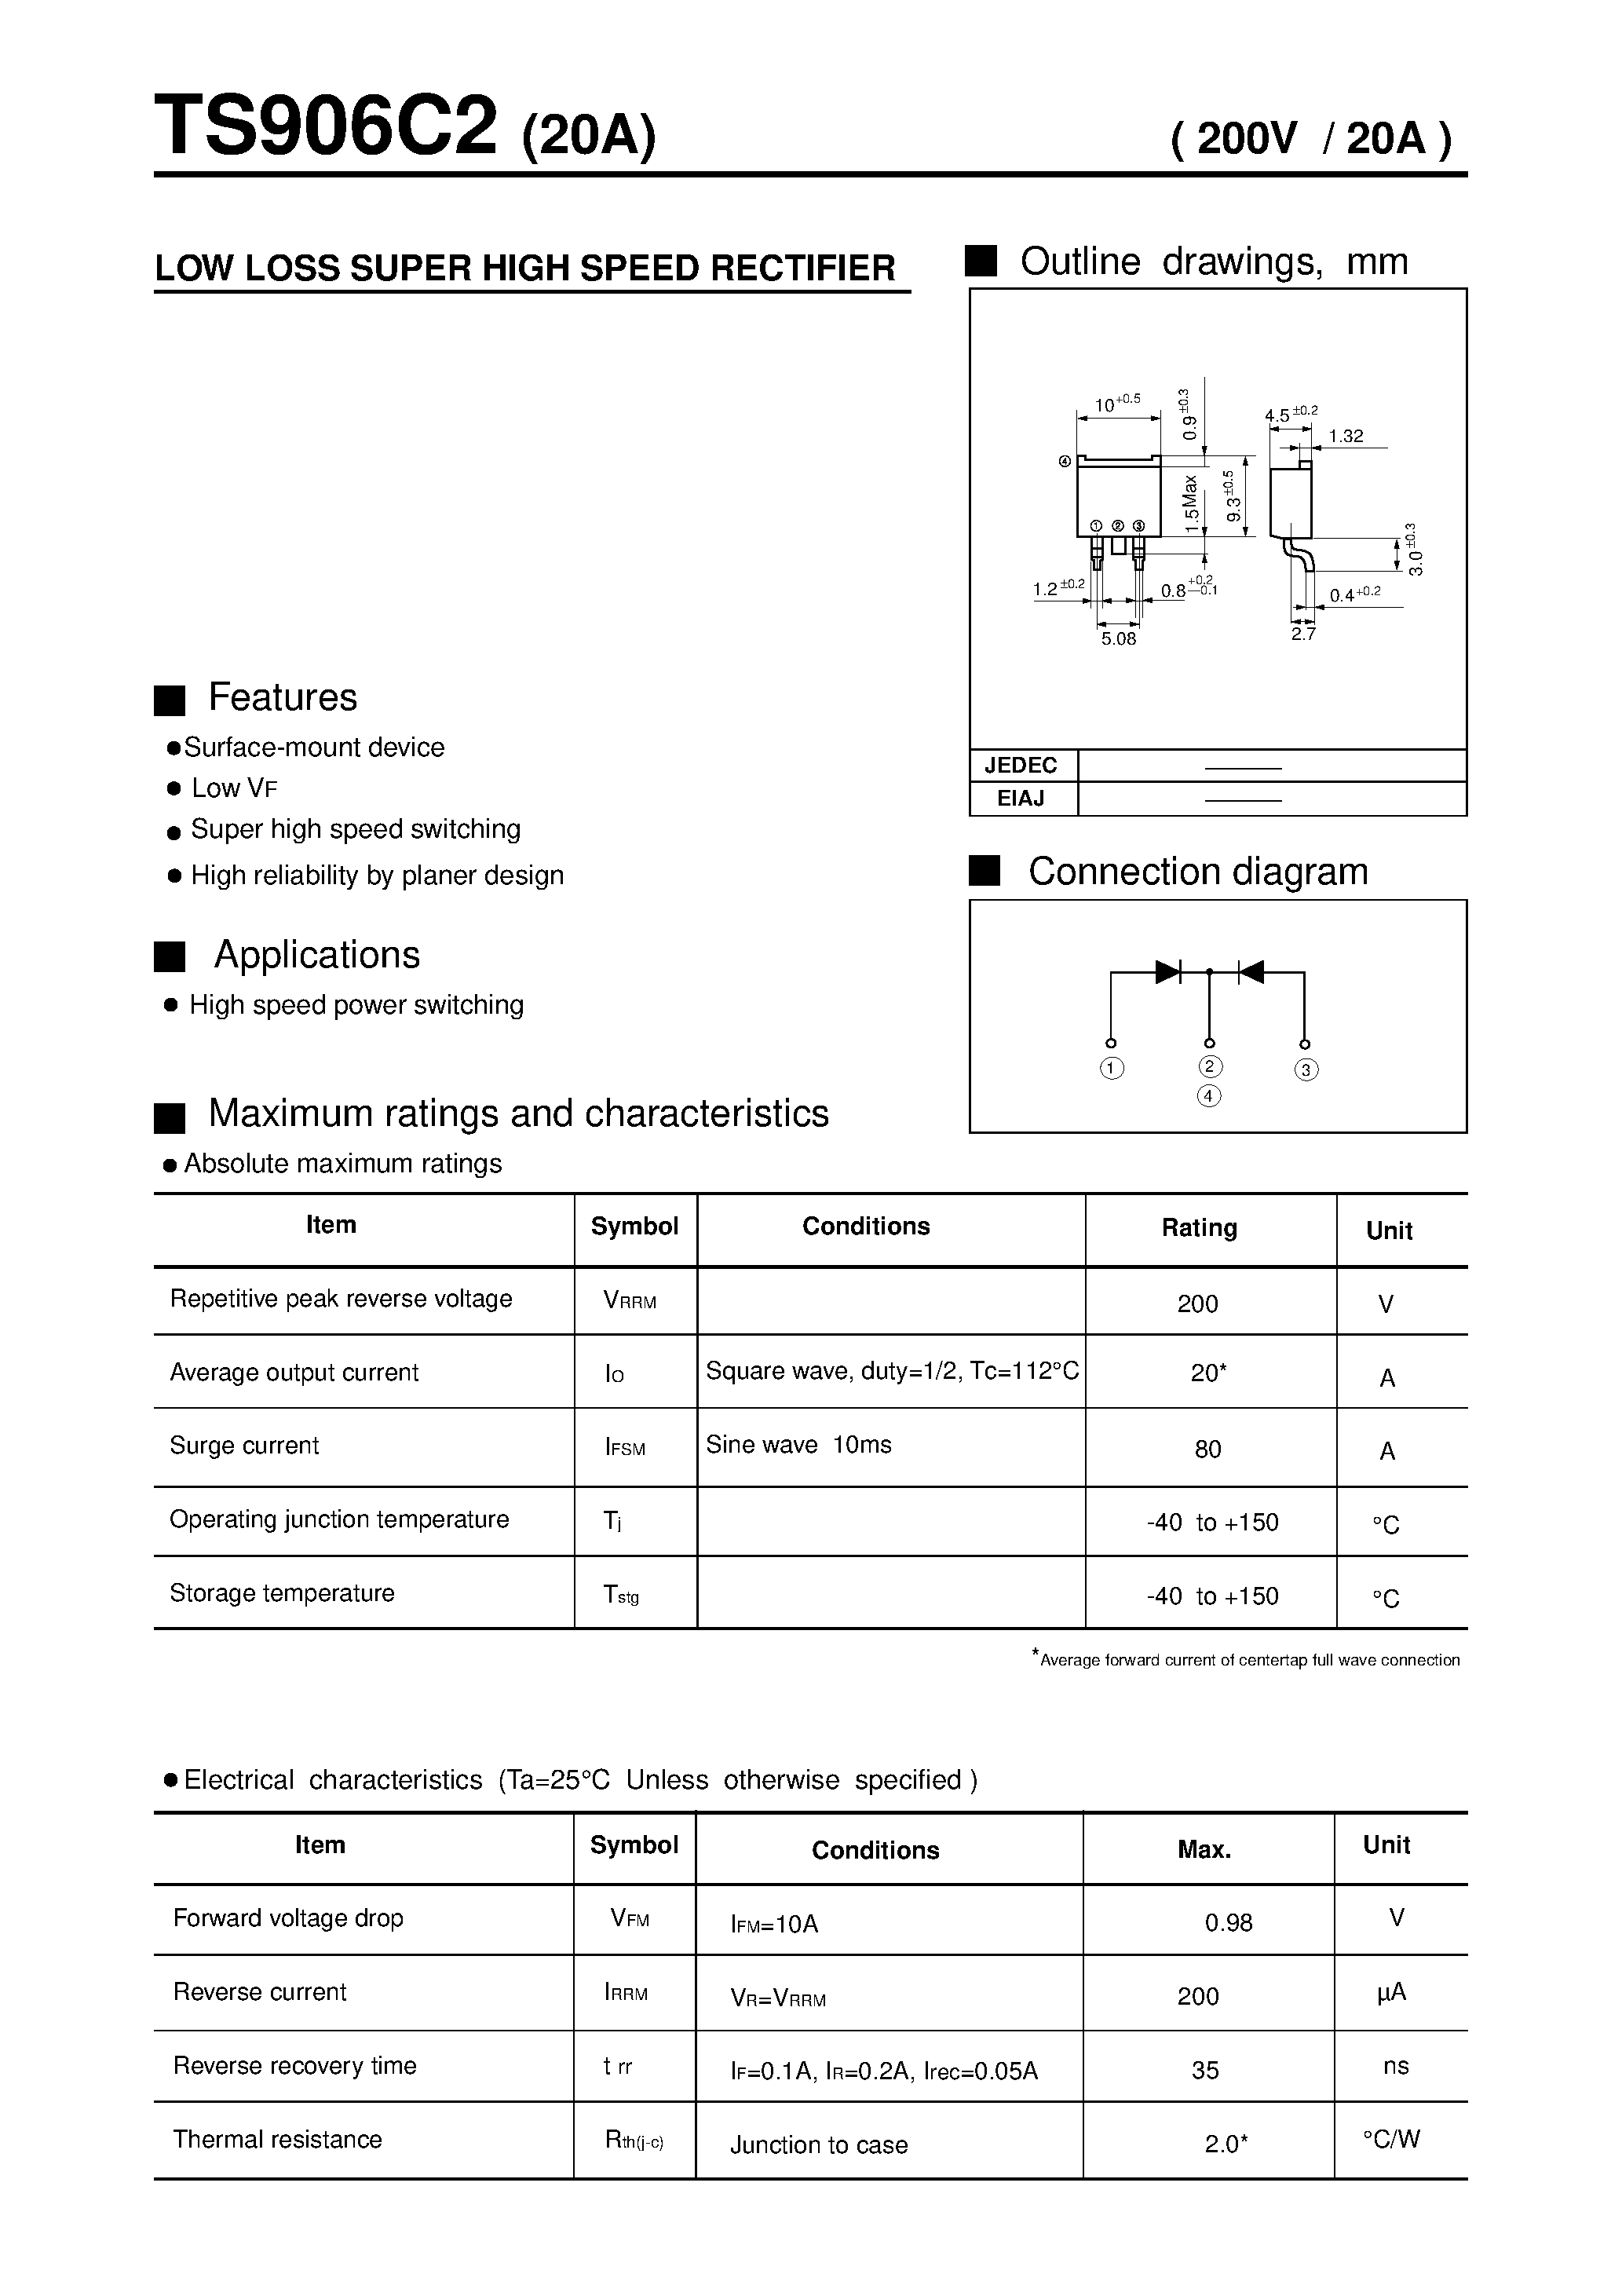 Datasheet TS906C2 - LOW LOSS SUPER HIGH SPEED RECTIFIER page 1